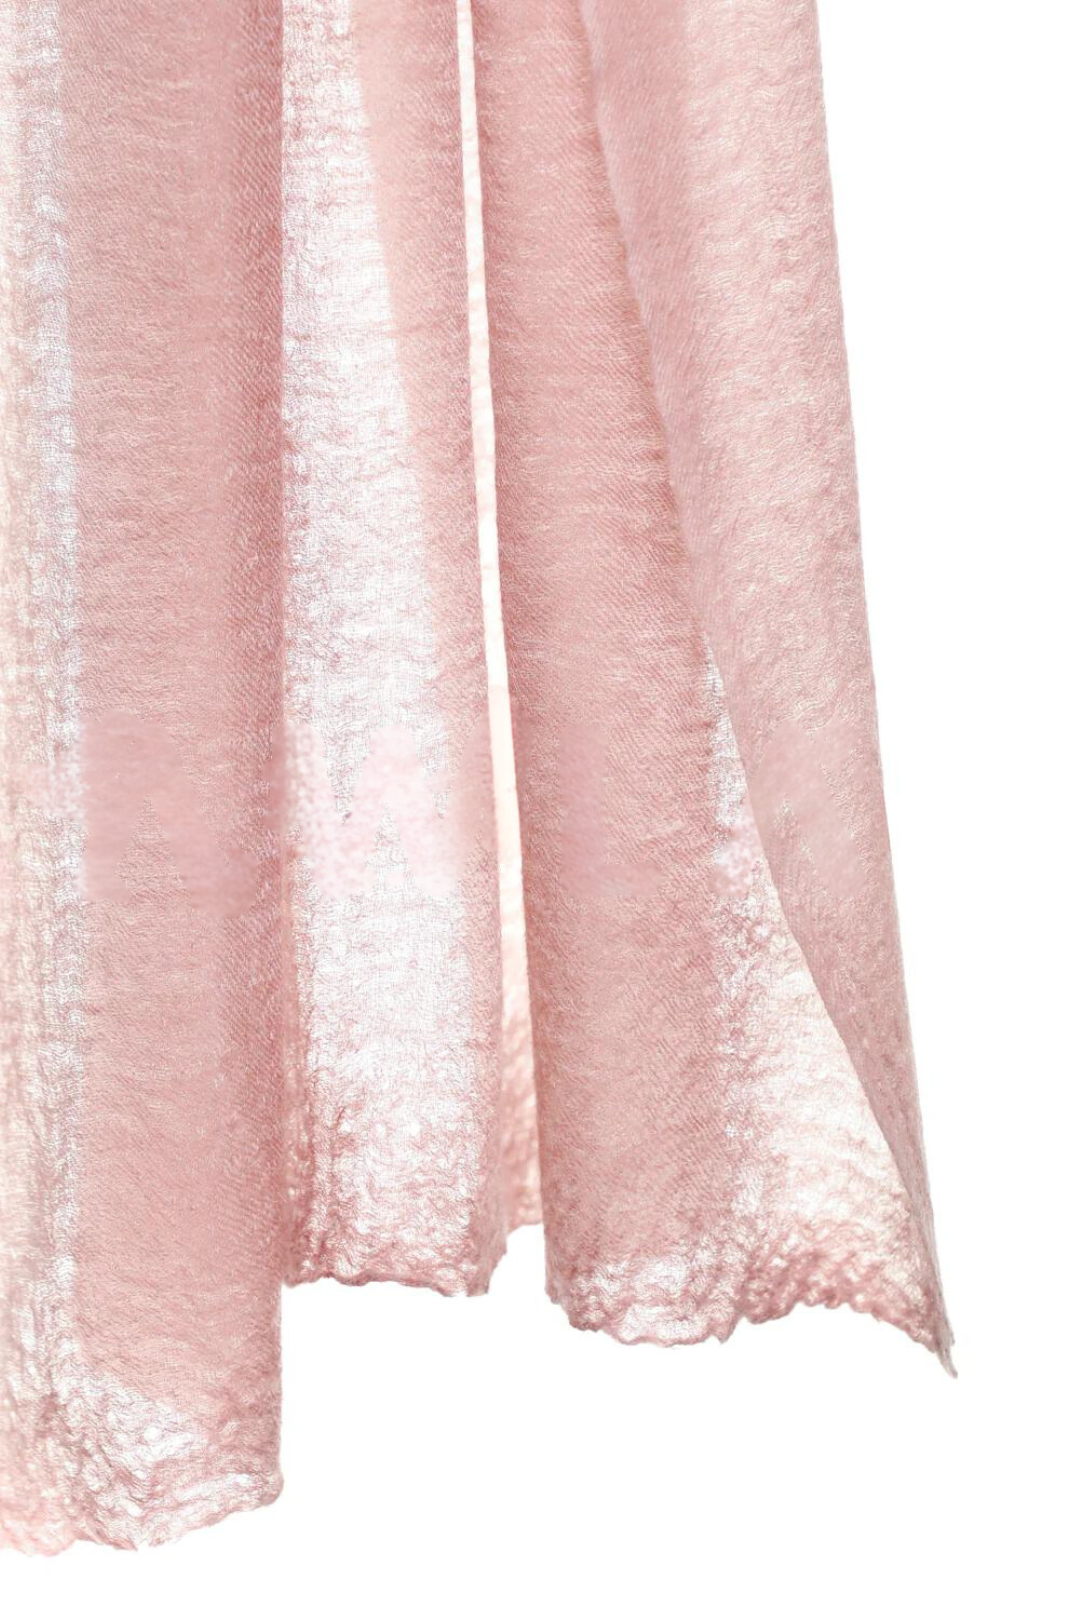 Simply Sparge Micro Baby Cashmere Stole - Peach